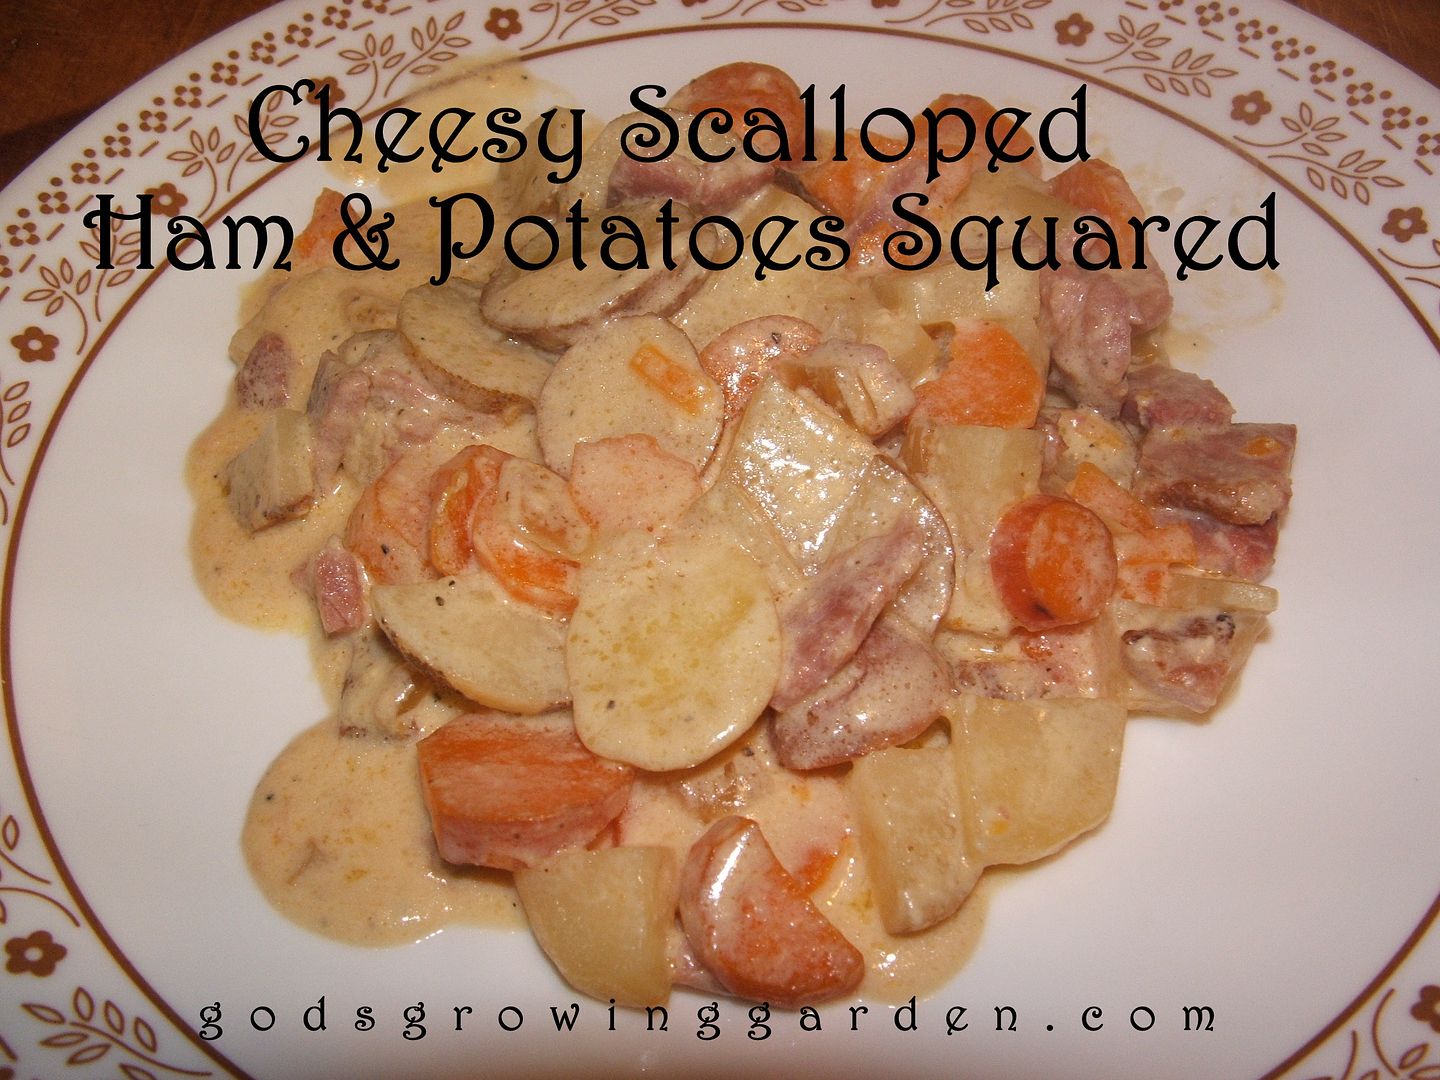 Cheesy Scalloped Potatoes Squared by Angie Ouellette-Tower for godsgrowinggarden.com photo 006_zps7406e3f9.jpg